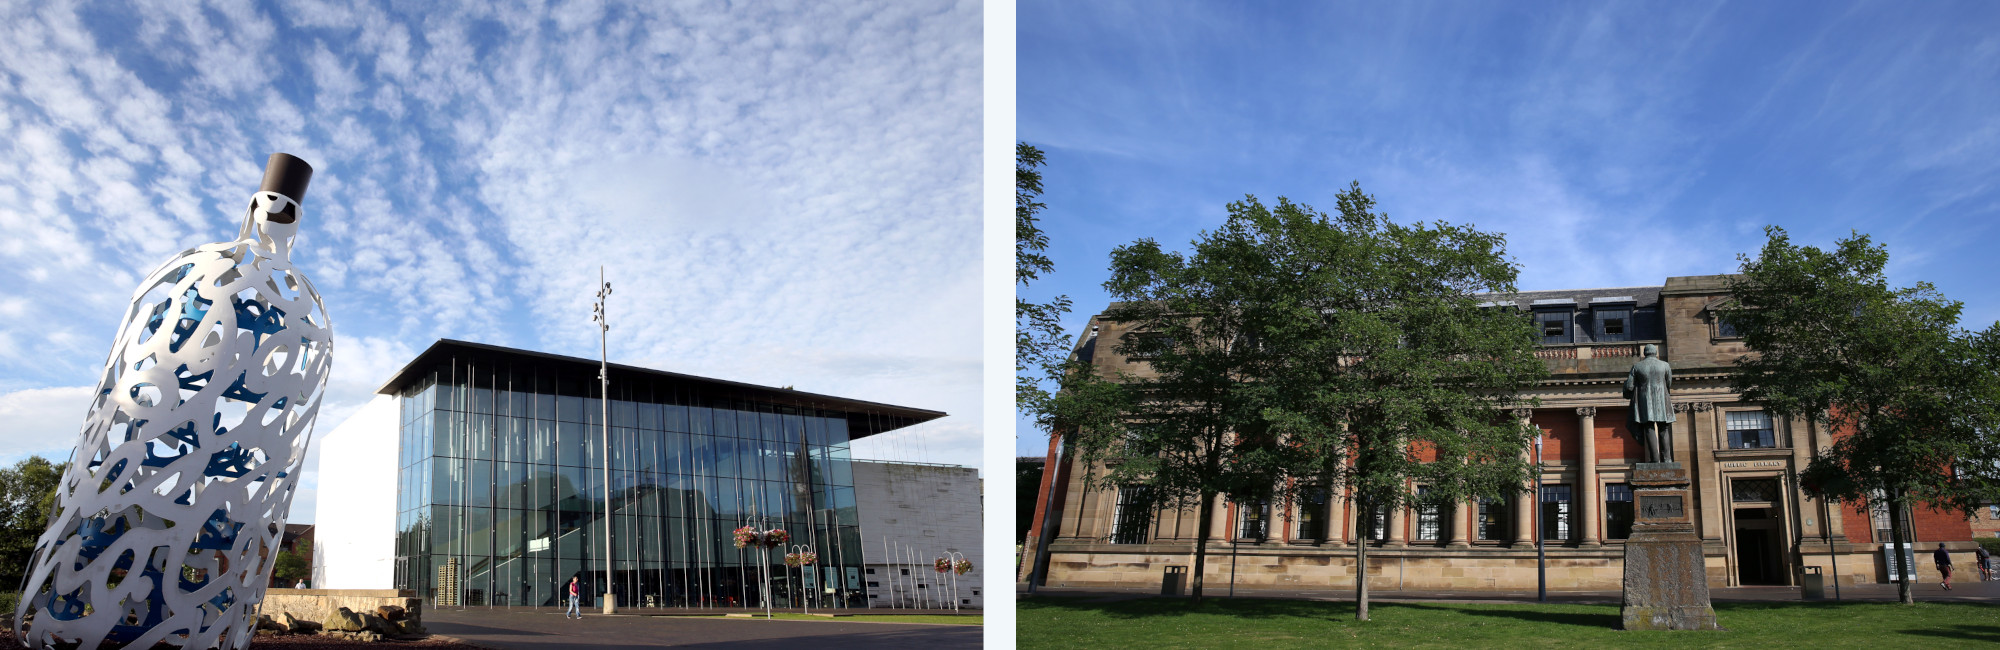 The Bottle of Notes, mima, and Central Library under blue skies